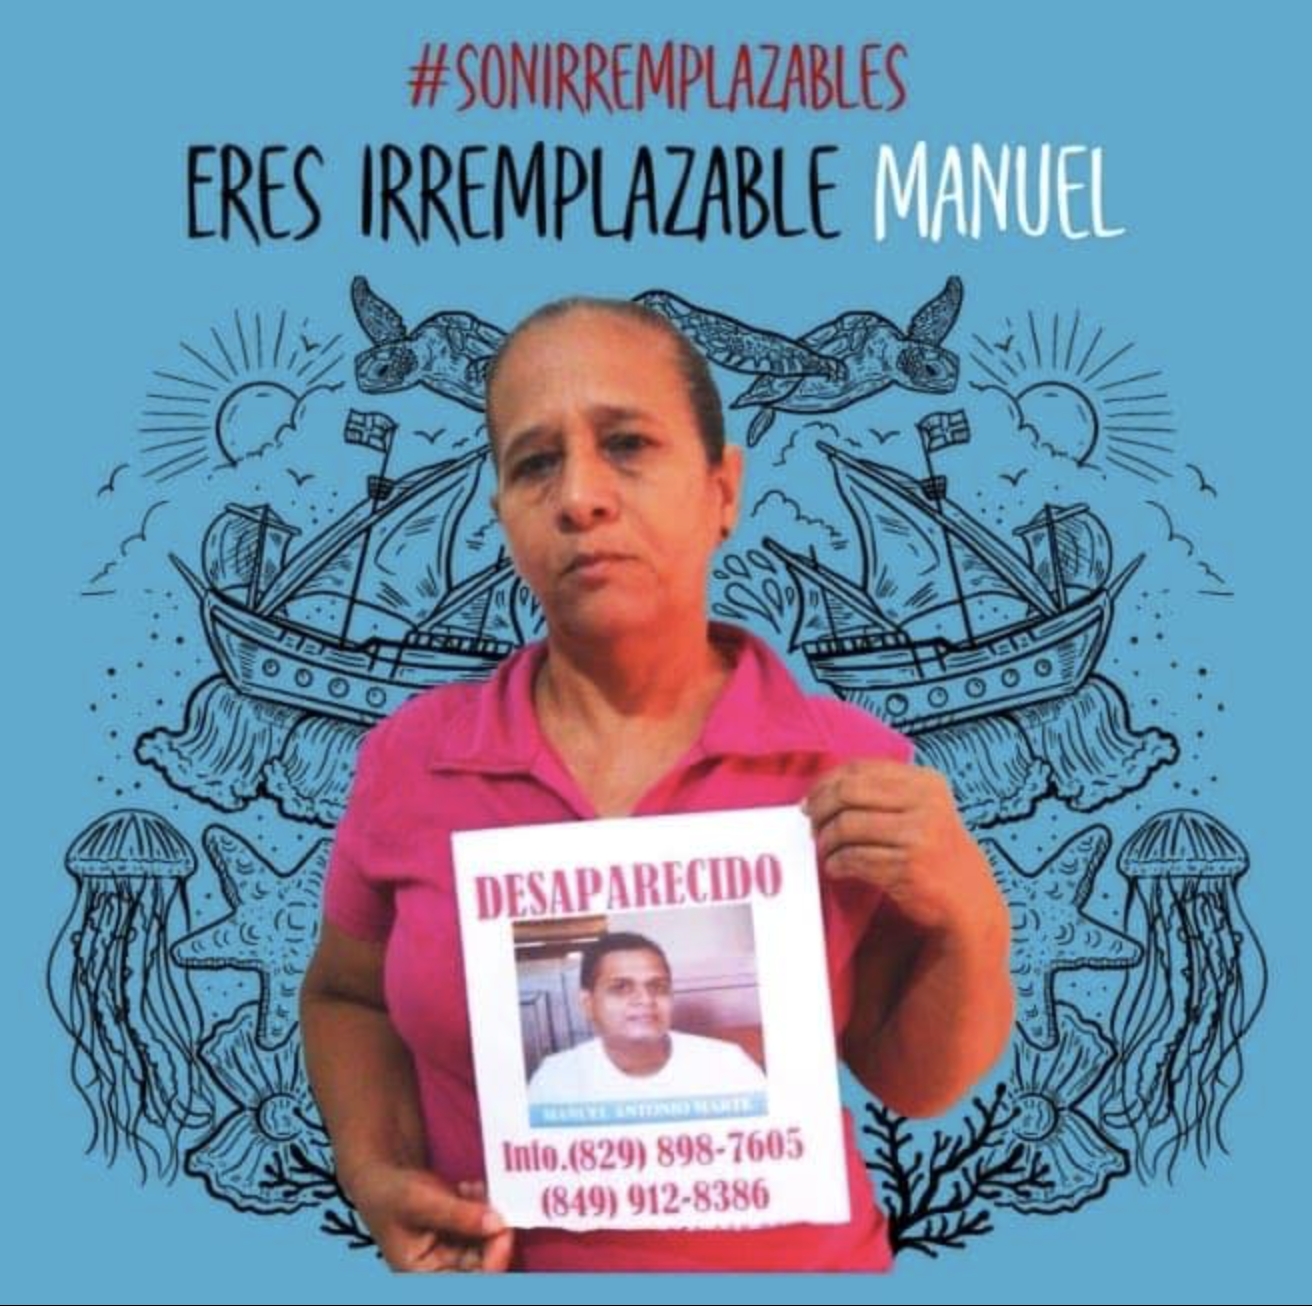 Honorary post for missing person Jorge Luis, a person holding up Manuel Marte's photo against a decorative blue background